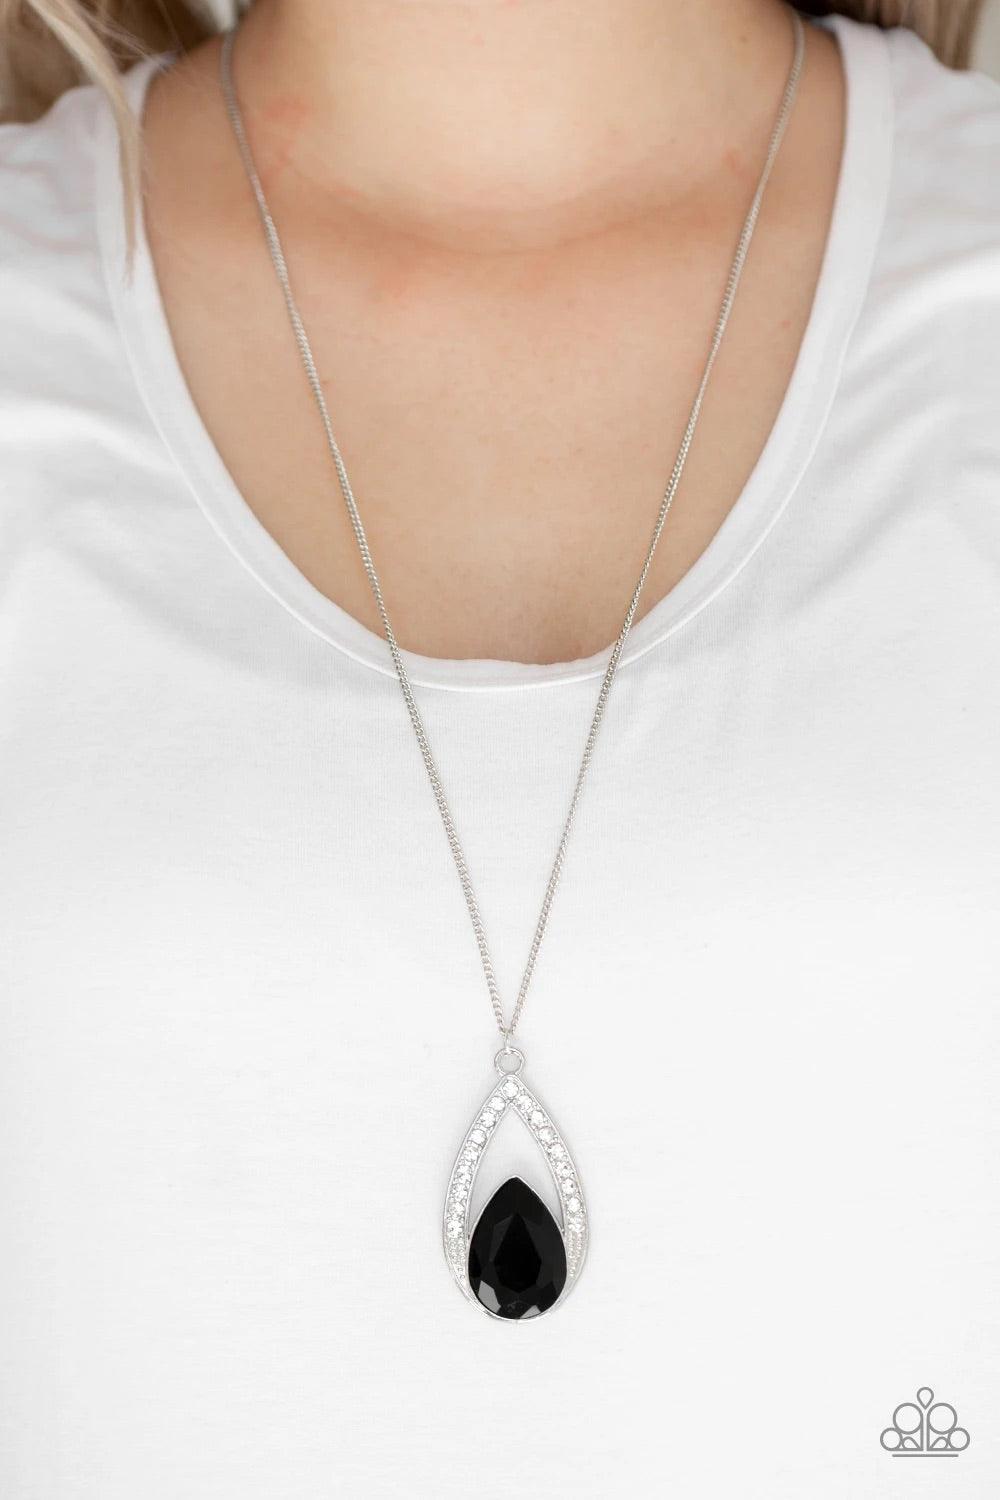 Paparazzi Accessories Notorious Noble - Black A glittery black teardrop gem is pressed into a silver frame radiating with glassy white rhinestones. The glamorous pendant swings from the bottom of a shimmery silver chain for a refined look. Features an adj